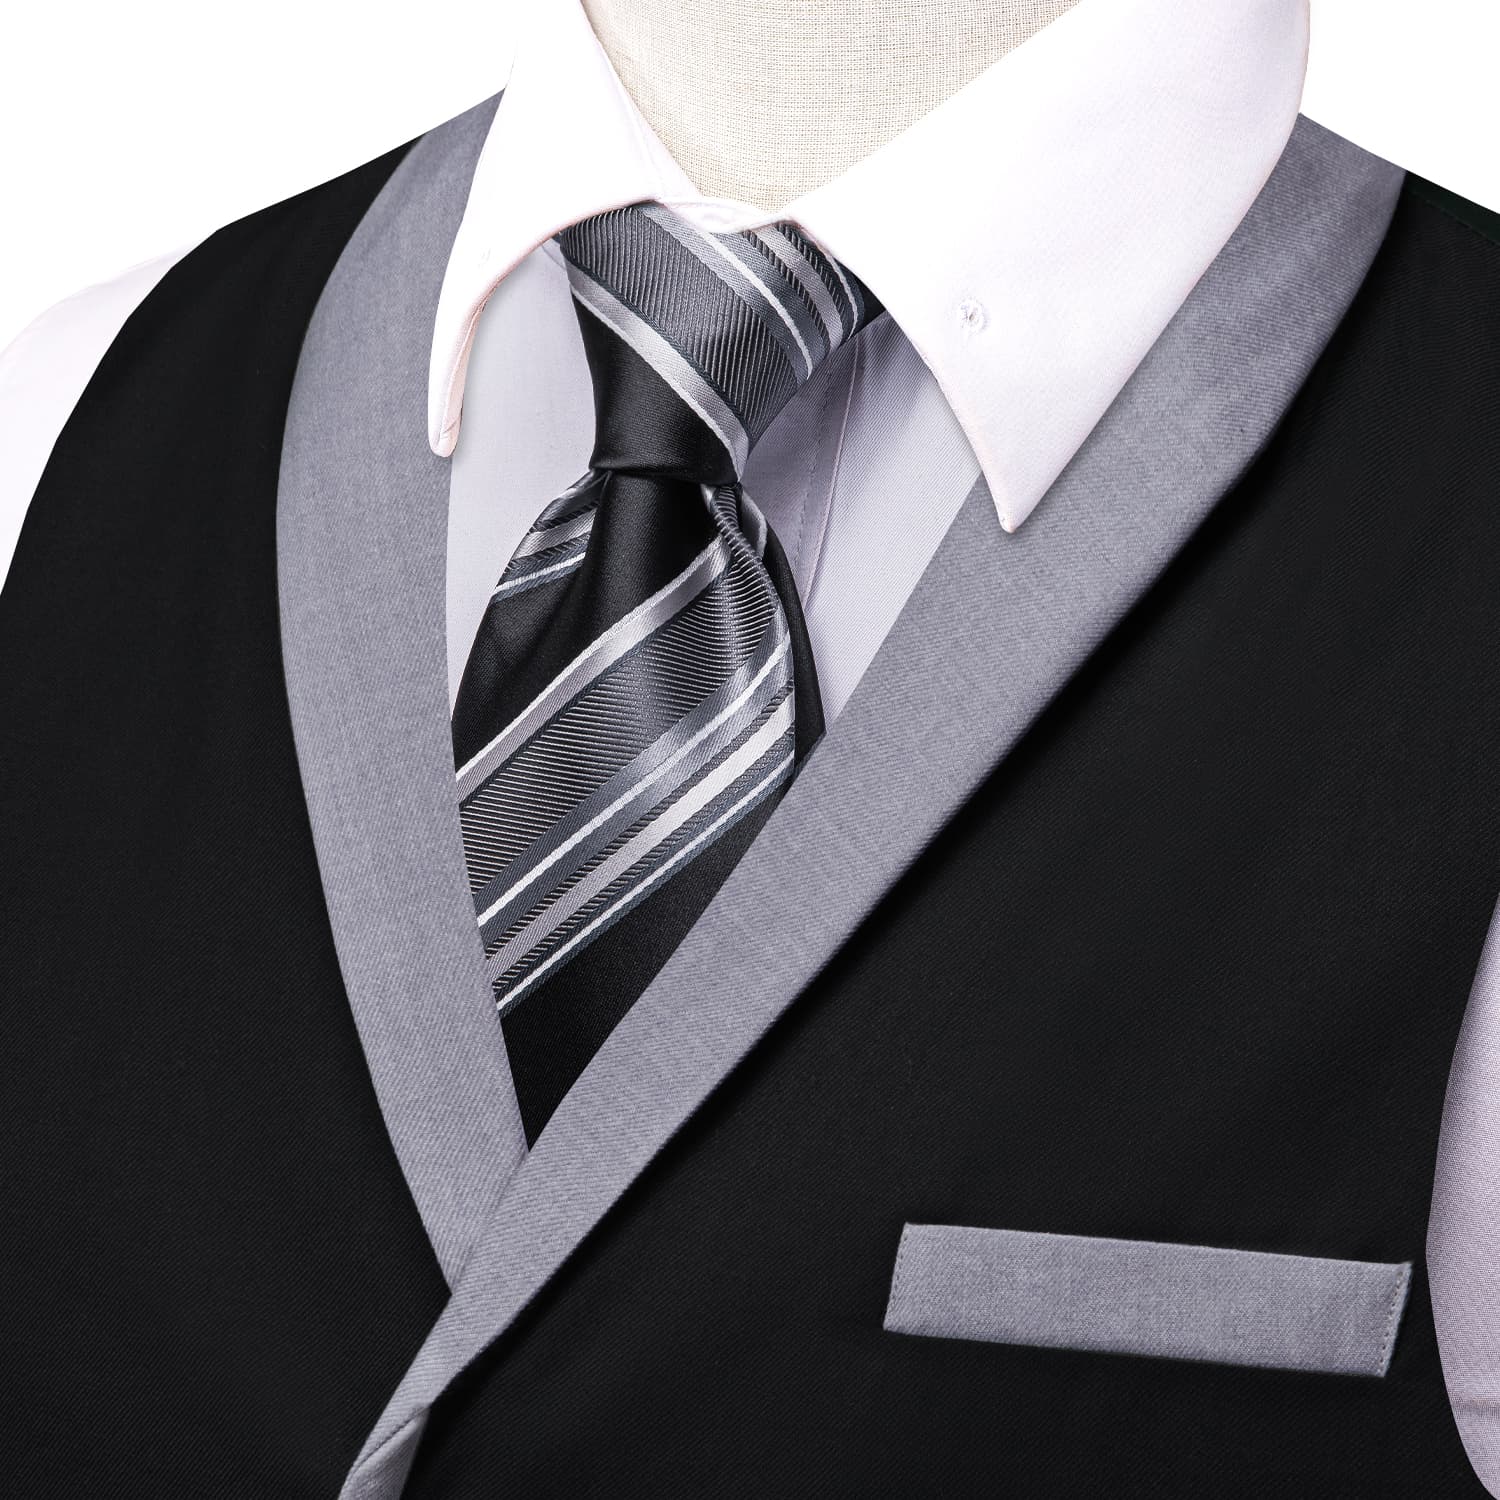  Grey Shawl Collar Black Solid Waistcoat Formal Vests for Business